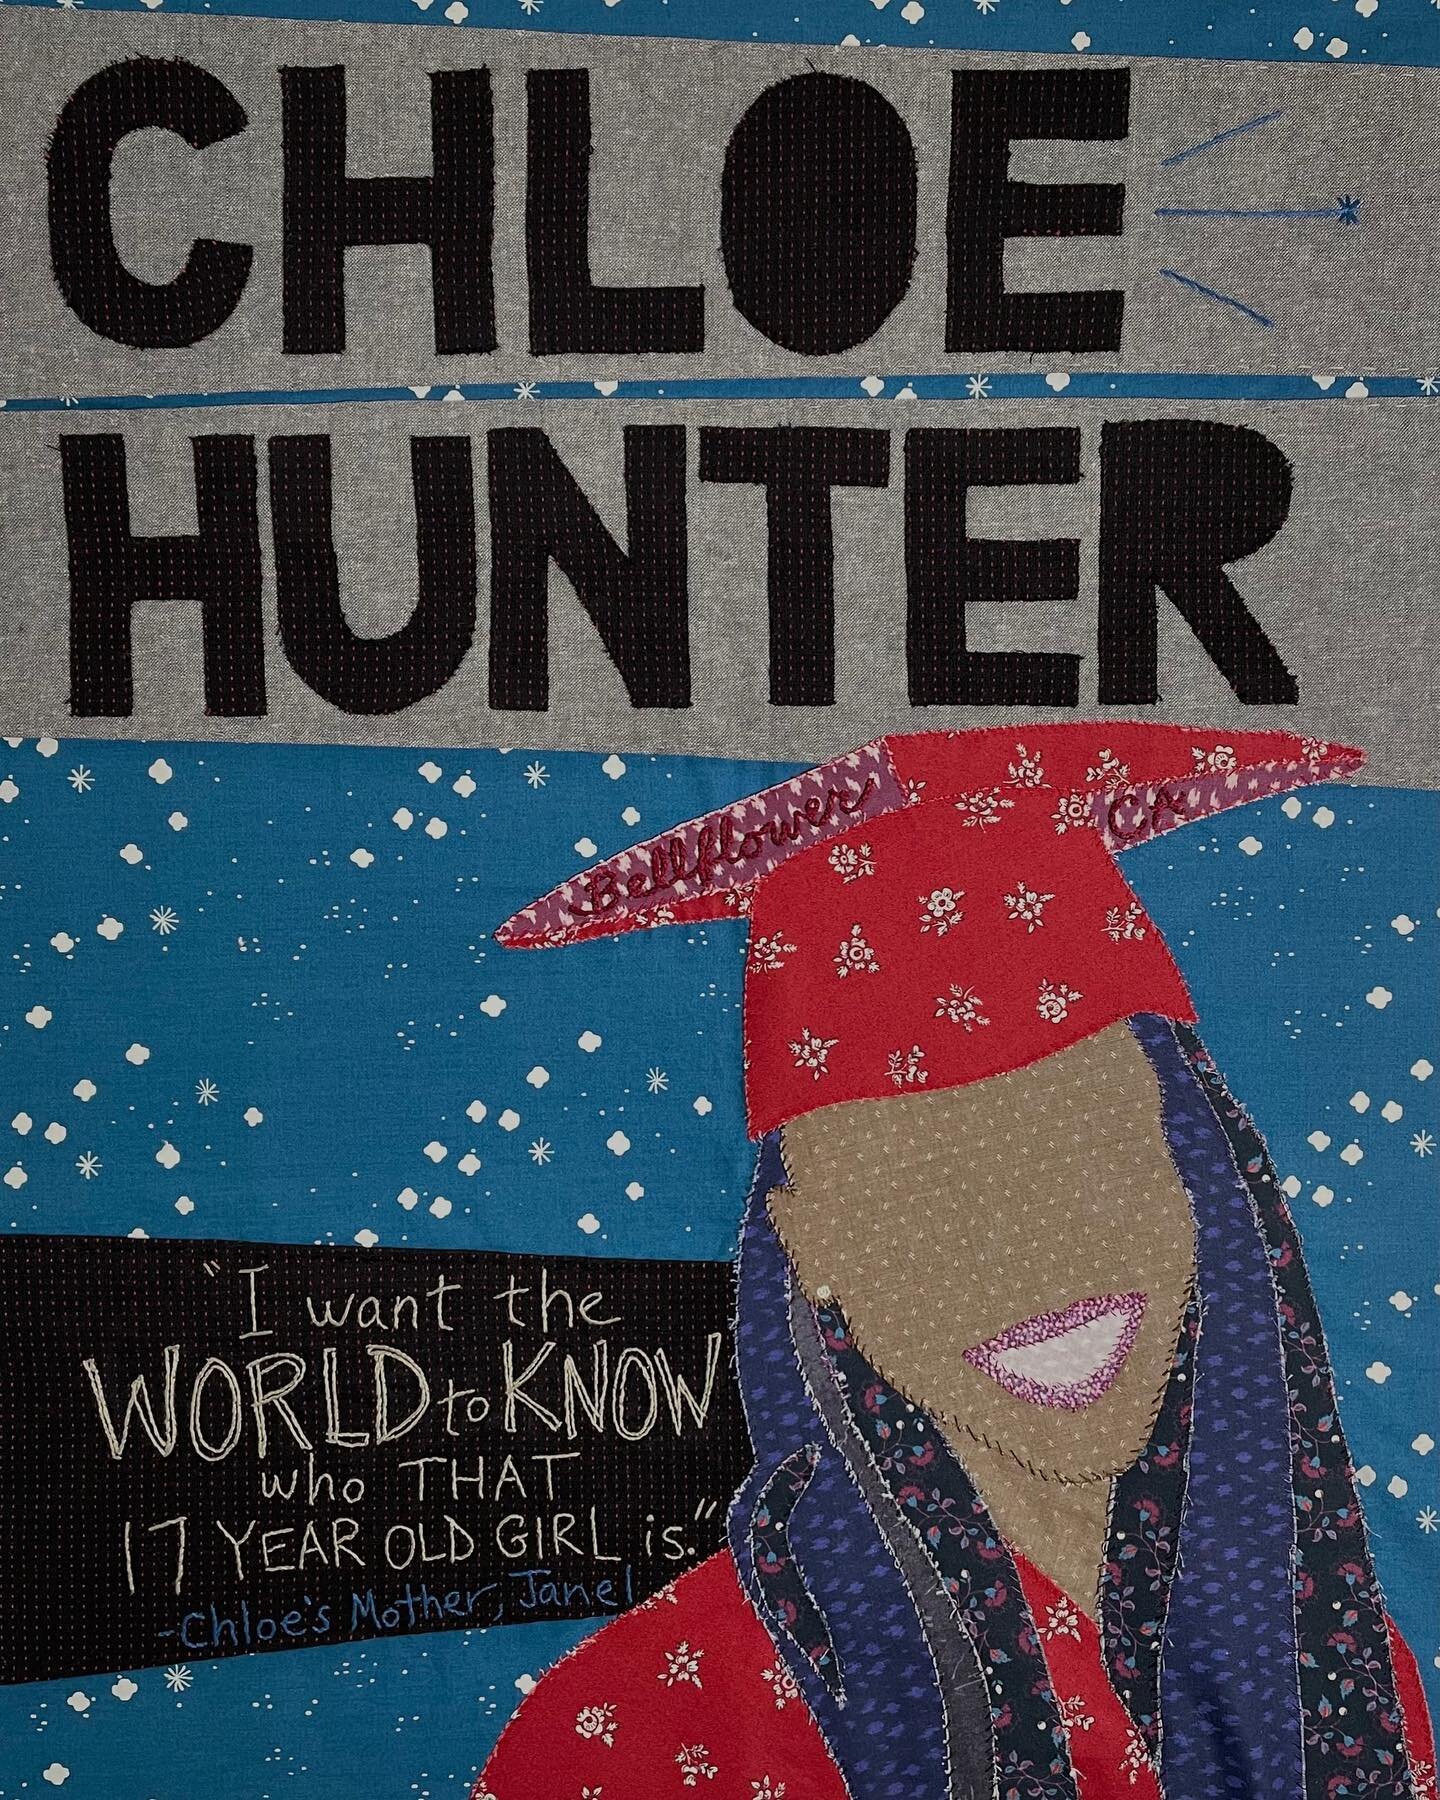 Her big heart, her contagious smile, her bright personality, her determination to succeed - Chloe Hunter was beyond her years. She graduated high school early and started taking college classes, all while holding down three jobs. She had a dream to b